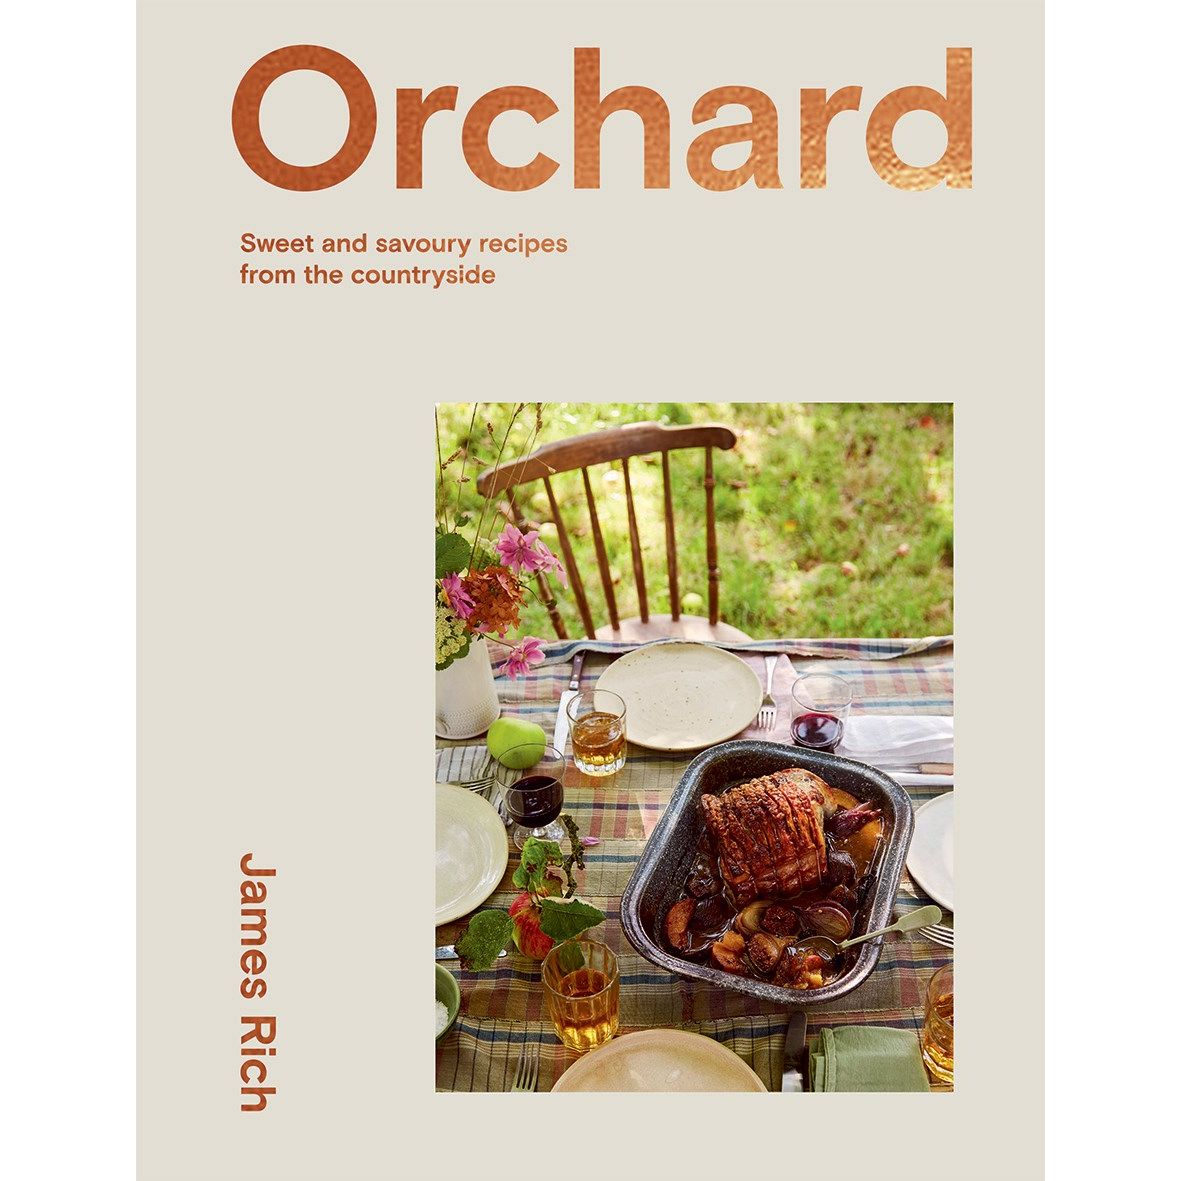 Orchard (James Rich)